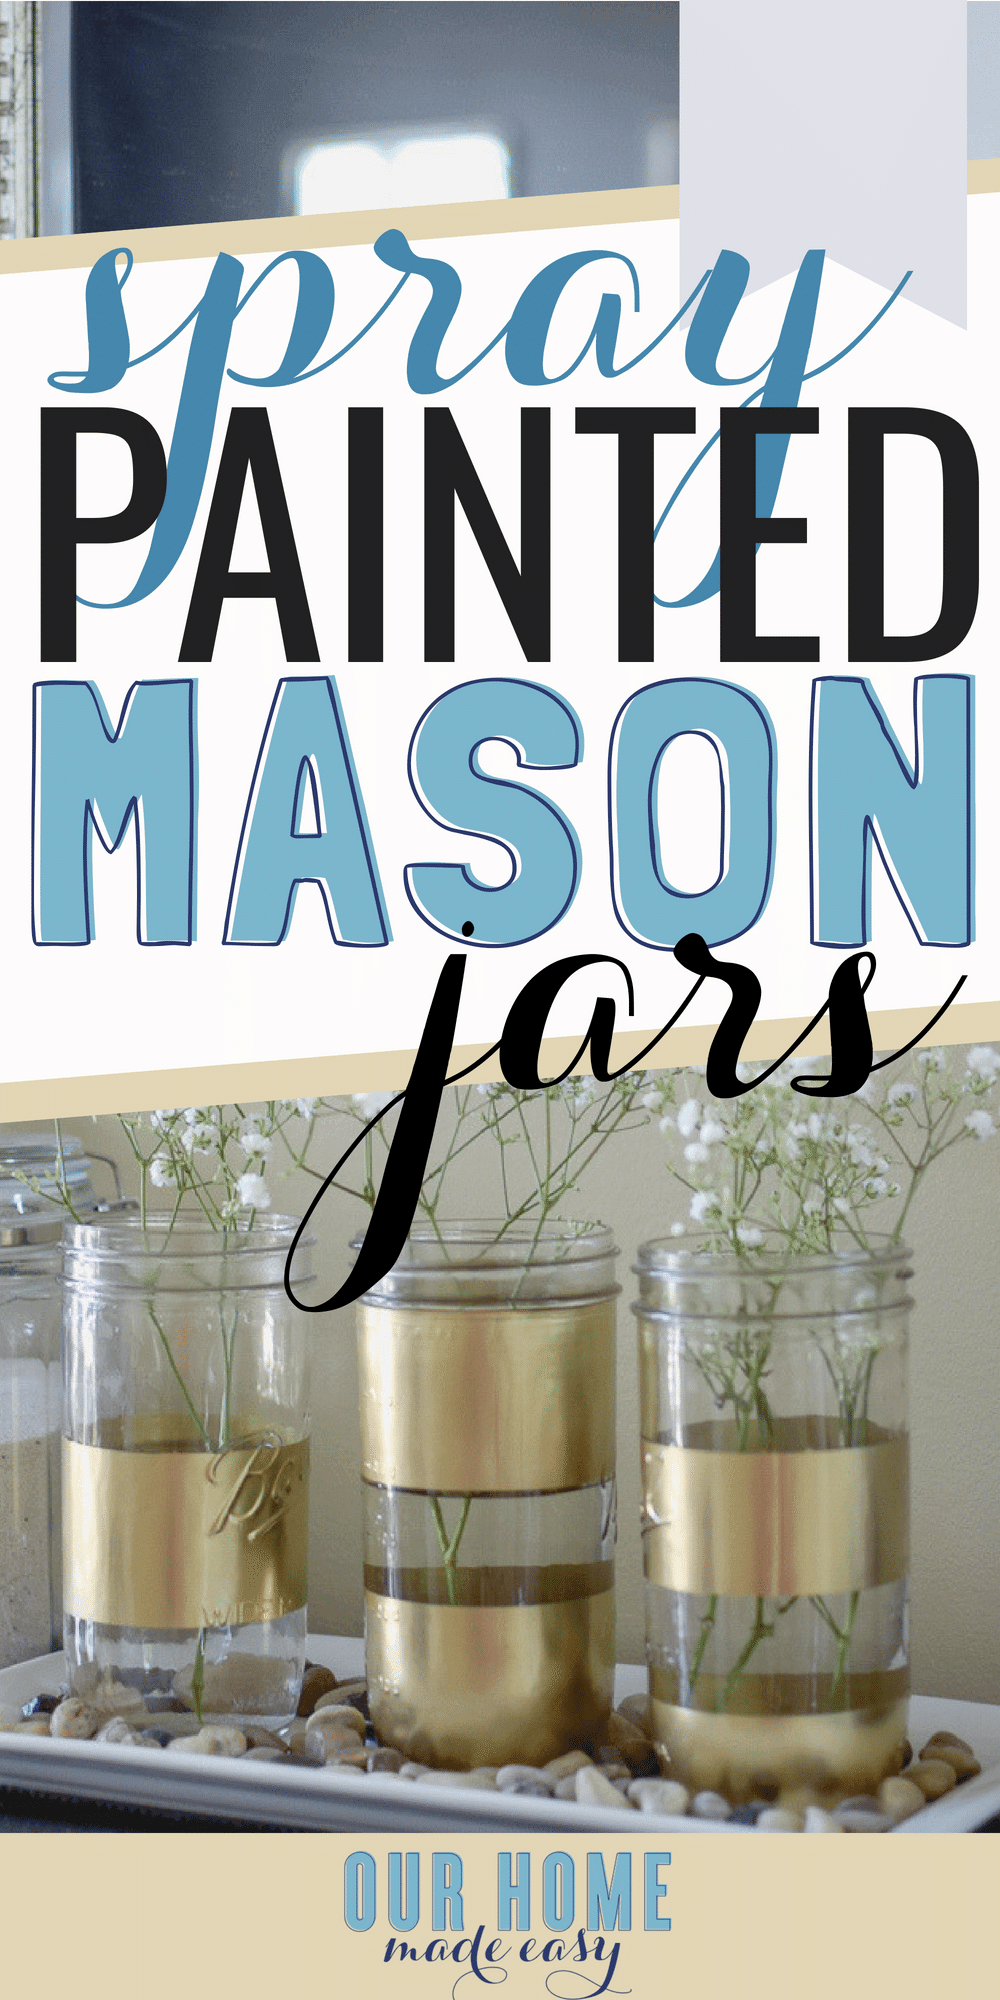 This quick project adds style-- without a big price tag! Spray painted mason jars are perfect for any season. #homedecor #painted #masonjars